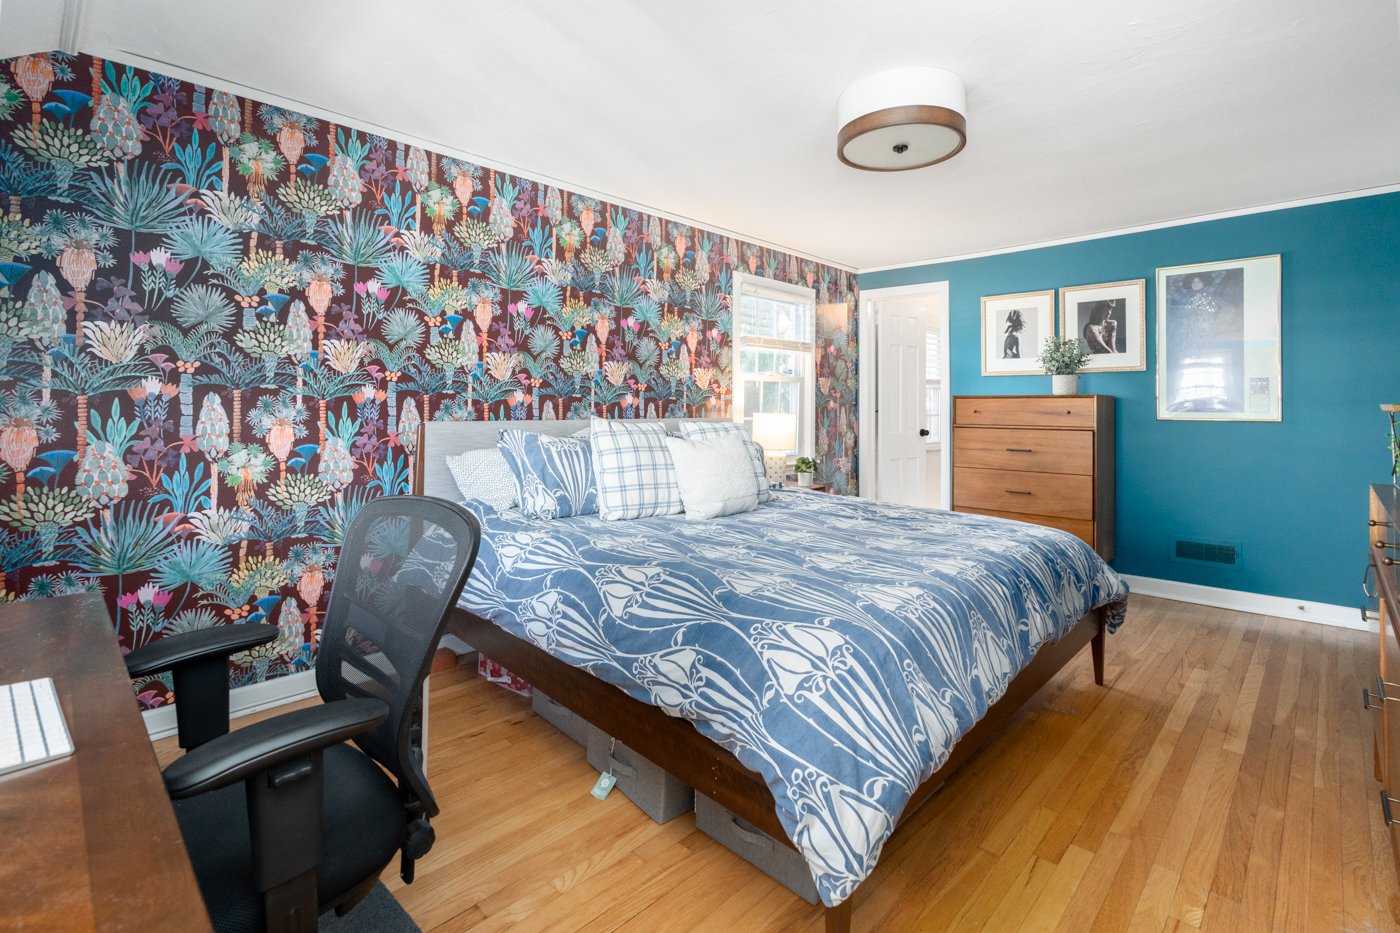 PRIMARY BED 566 Prospect real estate (Low res)-2.jpg